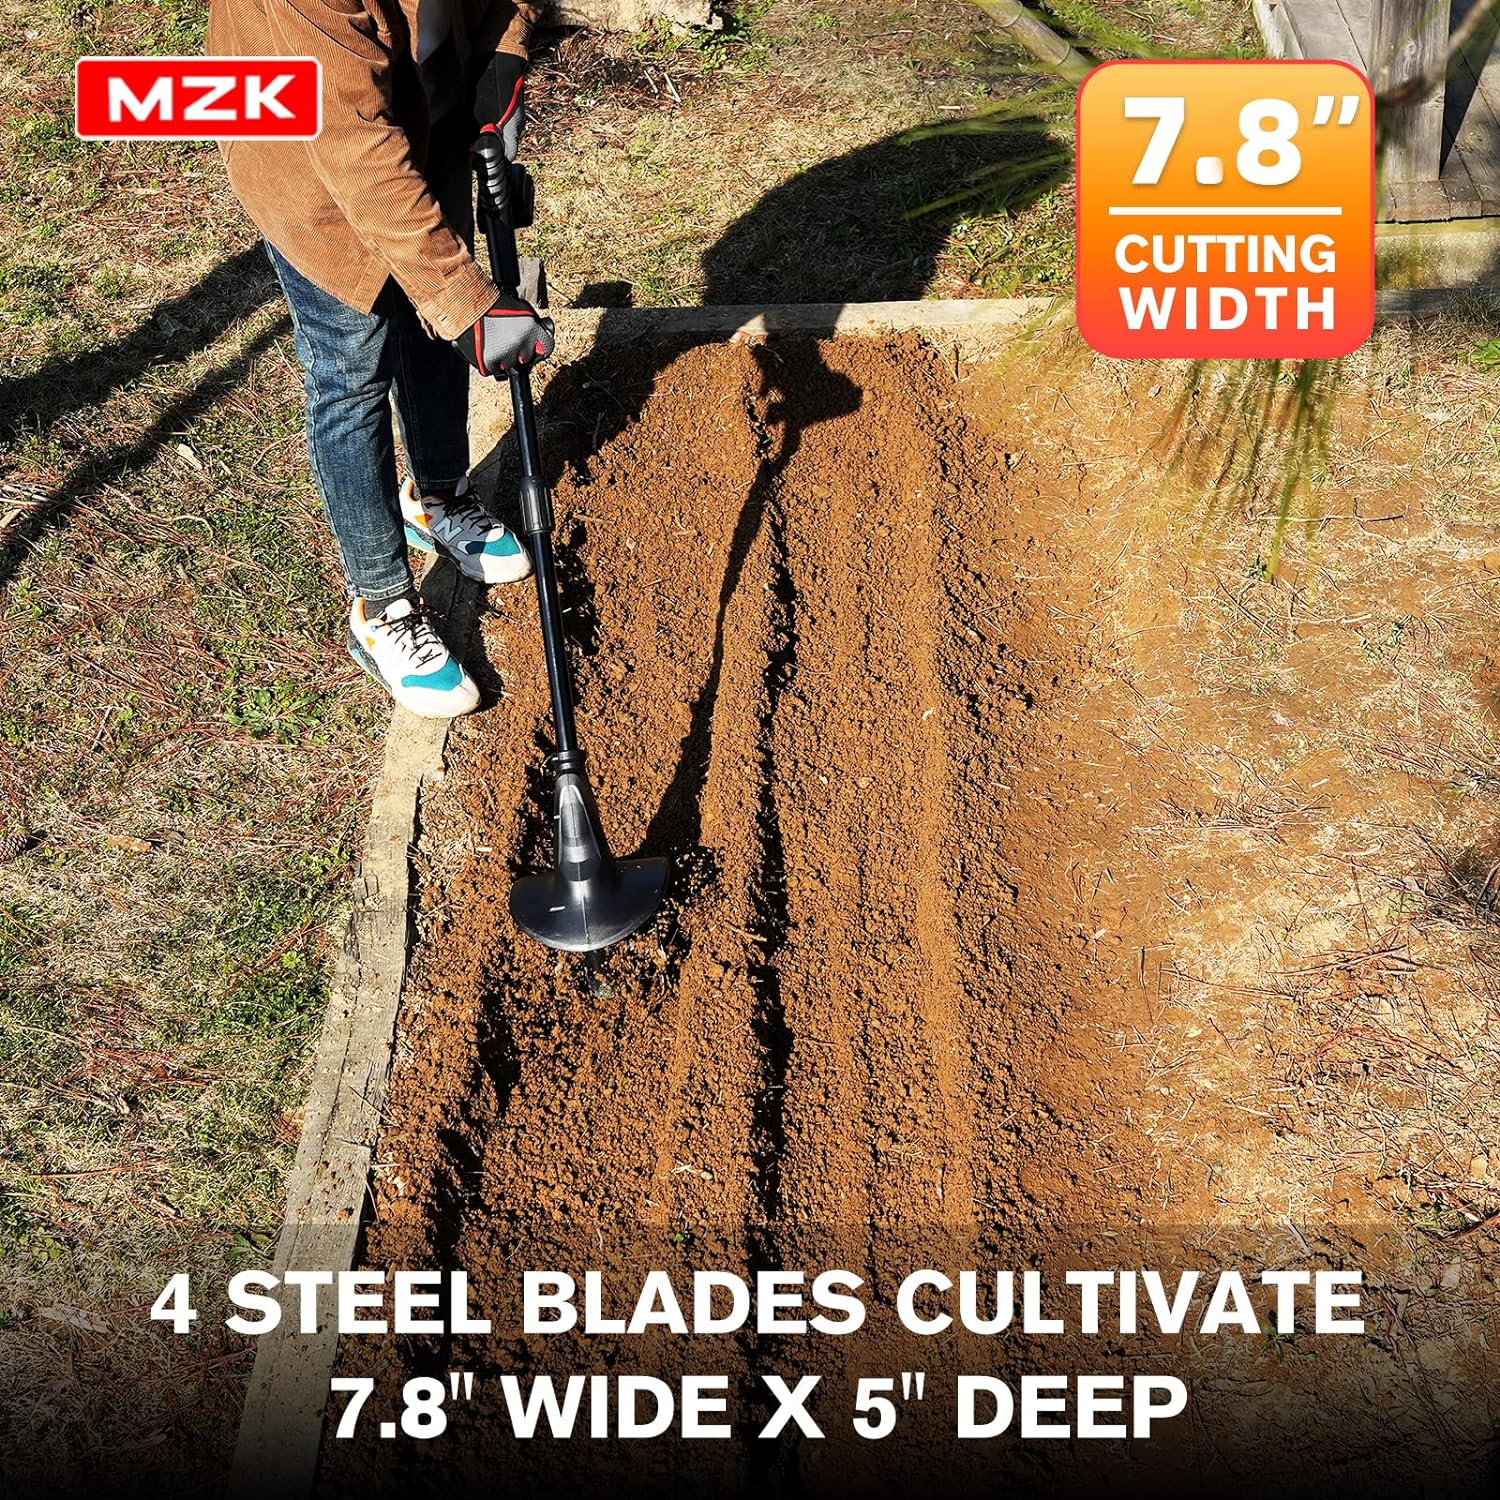 MZK Cordless Tiller Cultivator with 24 Steel